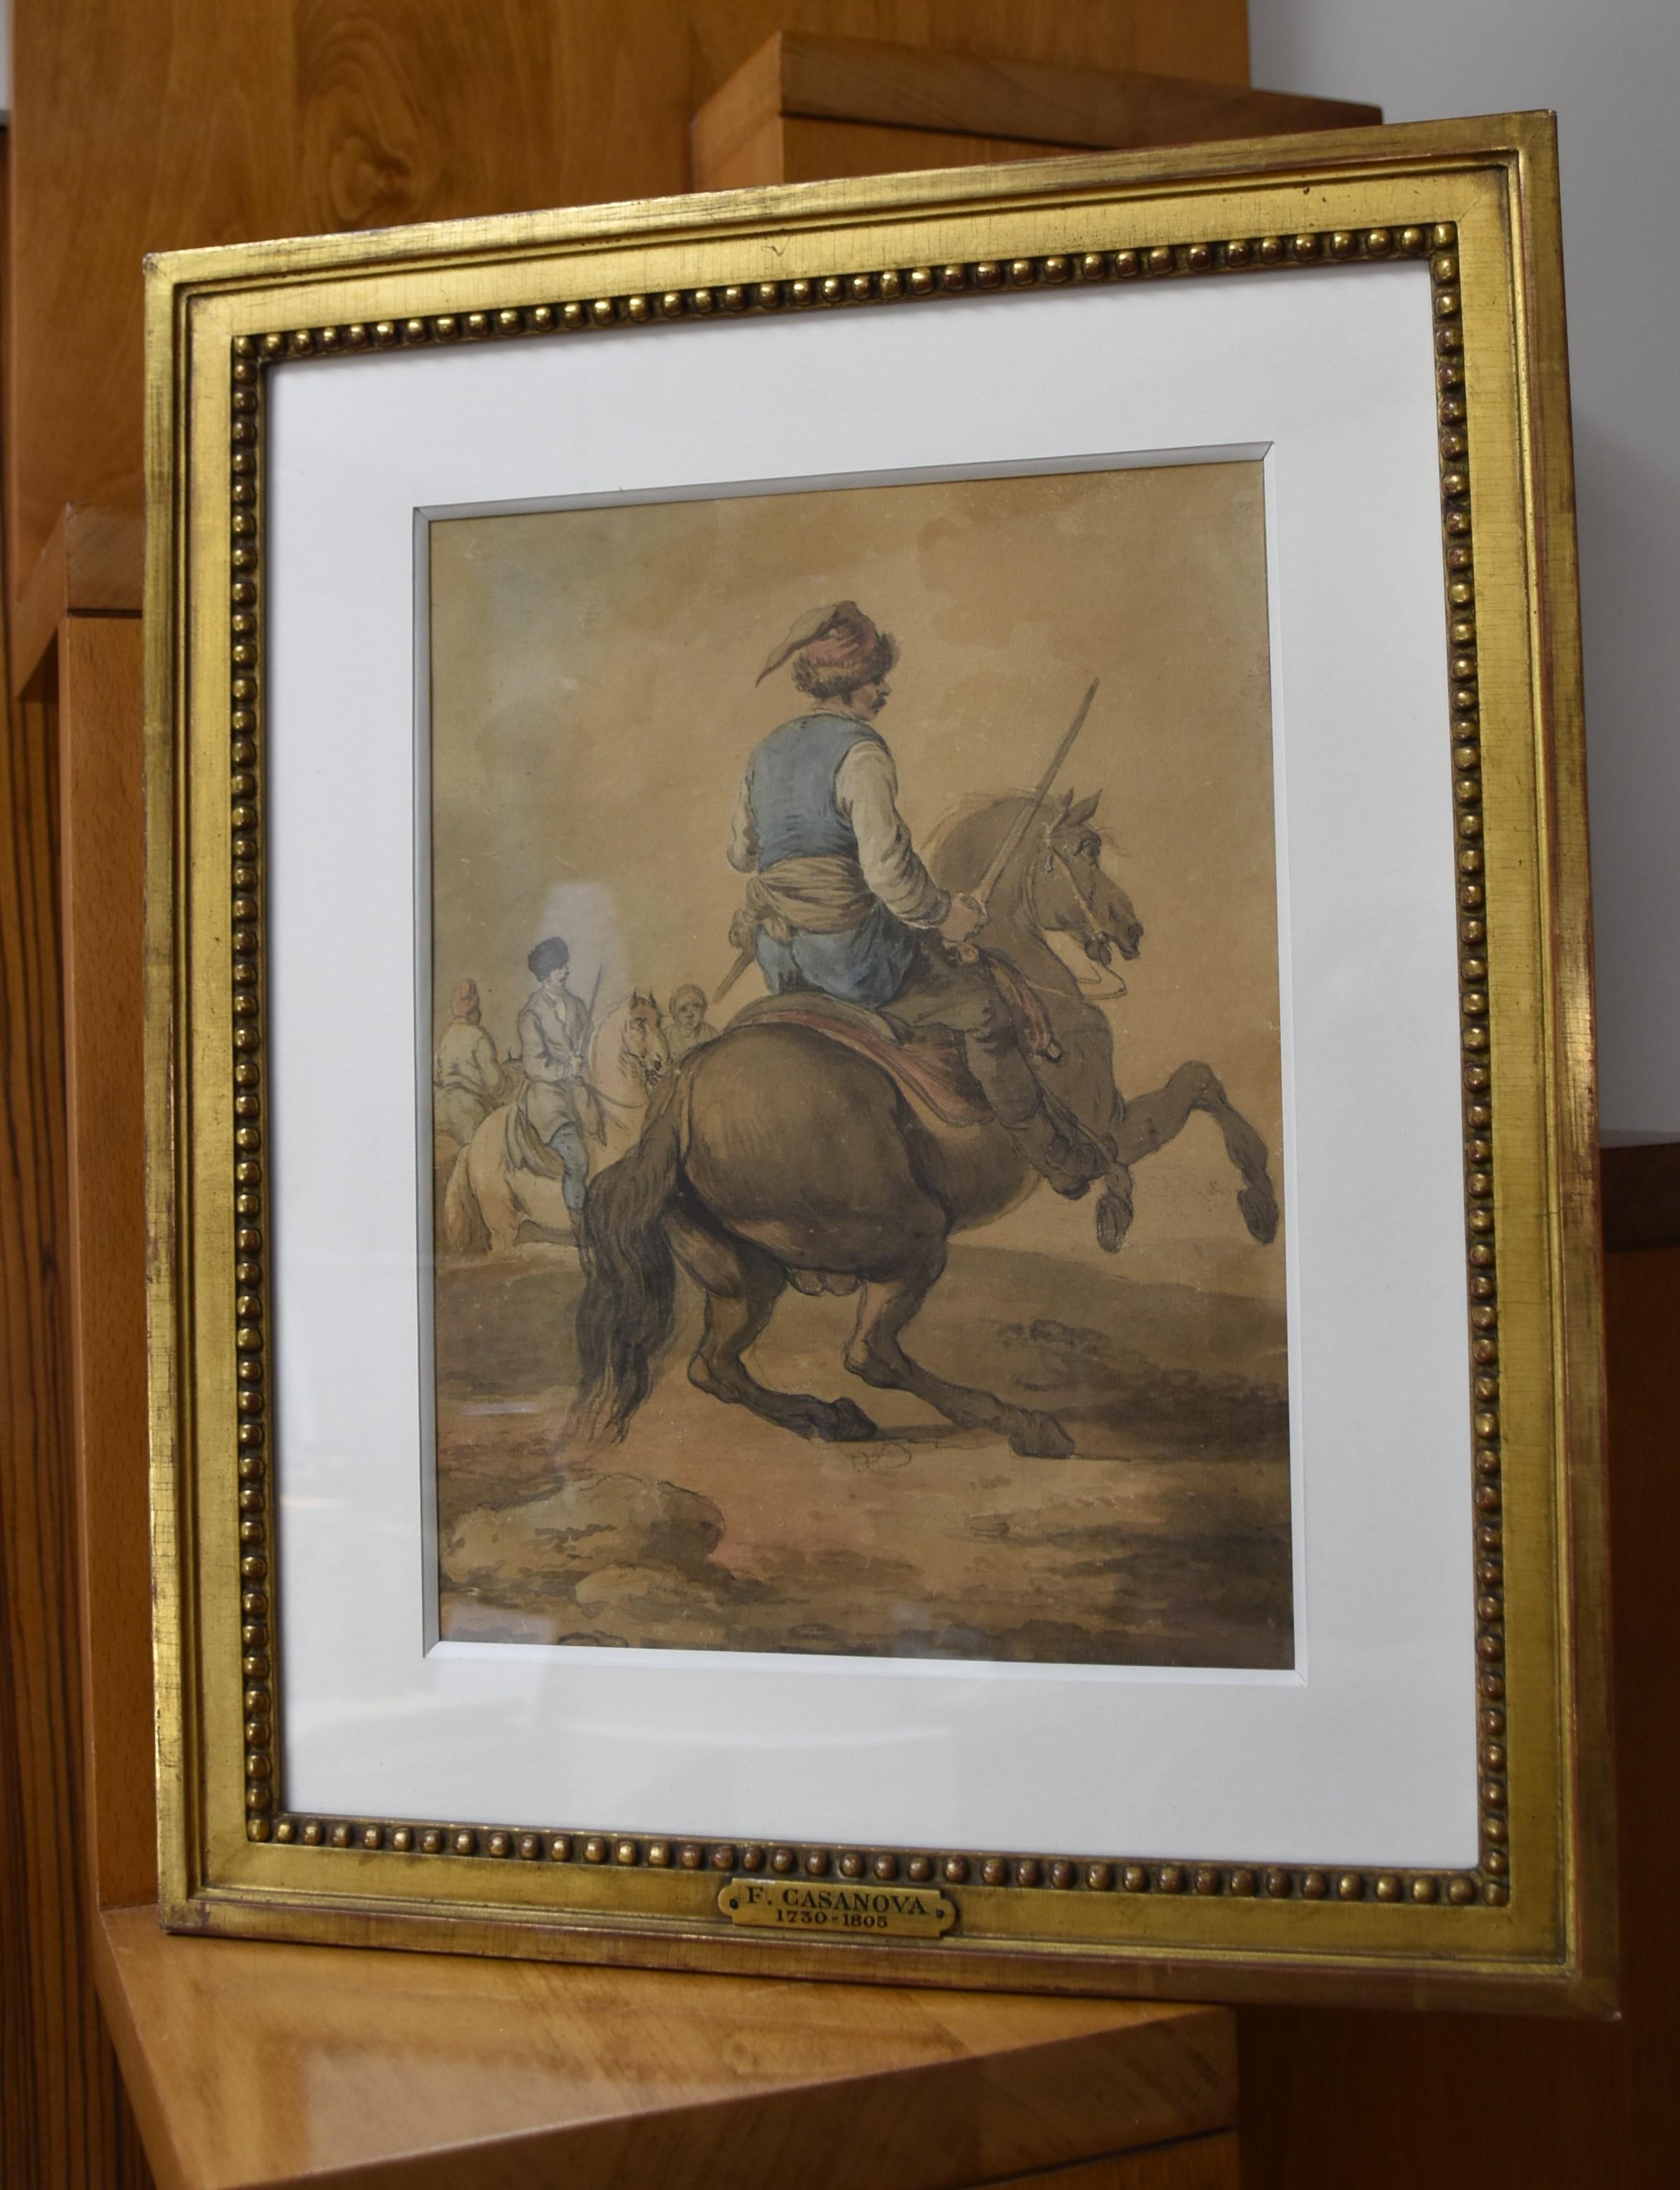 Attributed to Francesco Casanova (1727-1803), 
A Mamluk fighting on his horse, 
watercolor and ink on paper
35 x 26 cm
In quite good condition : yellowed by time as visible on the photographs.

Vintage frame with little damages (see photographs